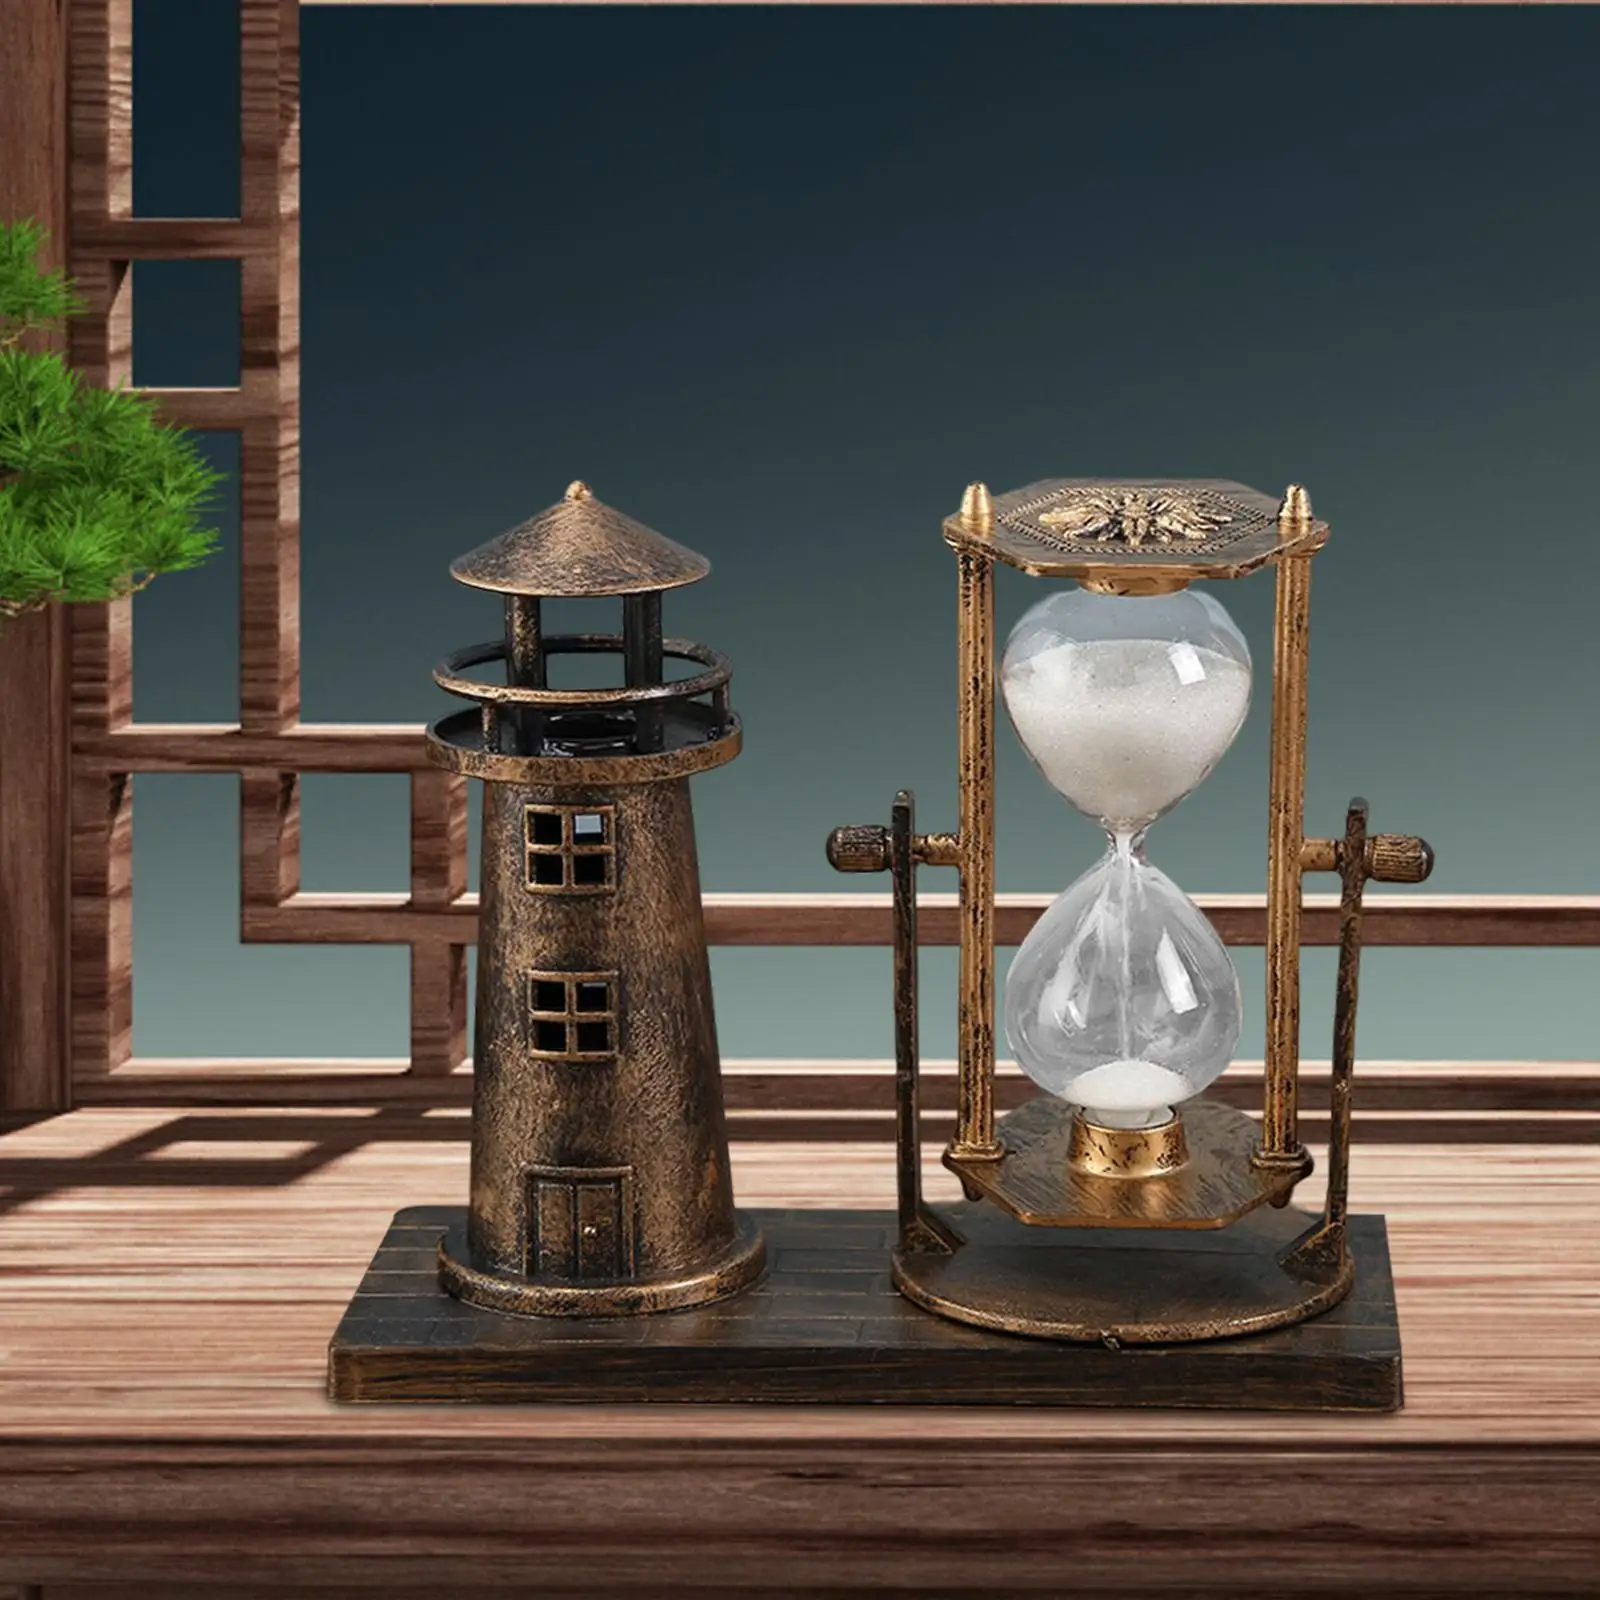 Retro Style Lighthouse Hourglass Sand Timer Decorations Statue Centerpiece Ornaments for School Tabletop Office New Year Gift